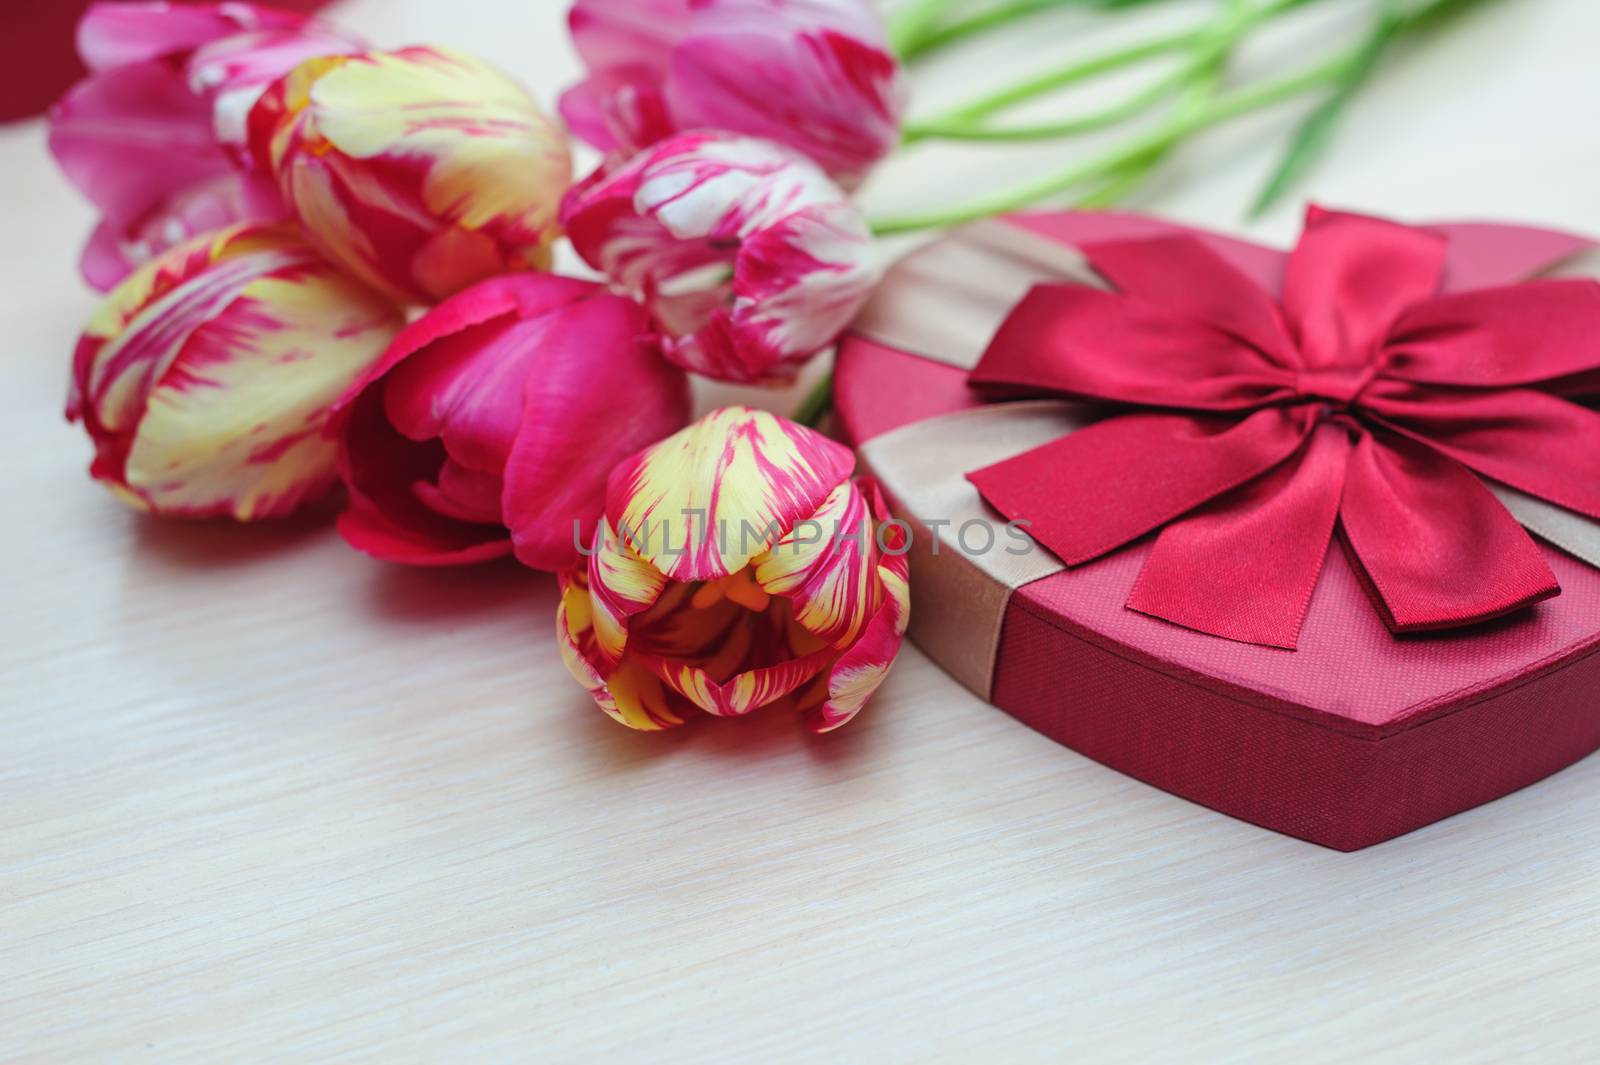 bouquet of tulips and gift box with red bow.